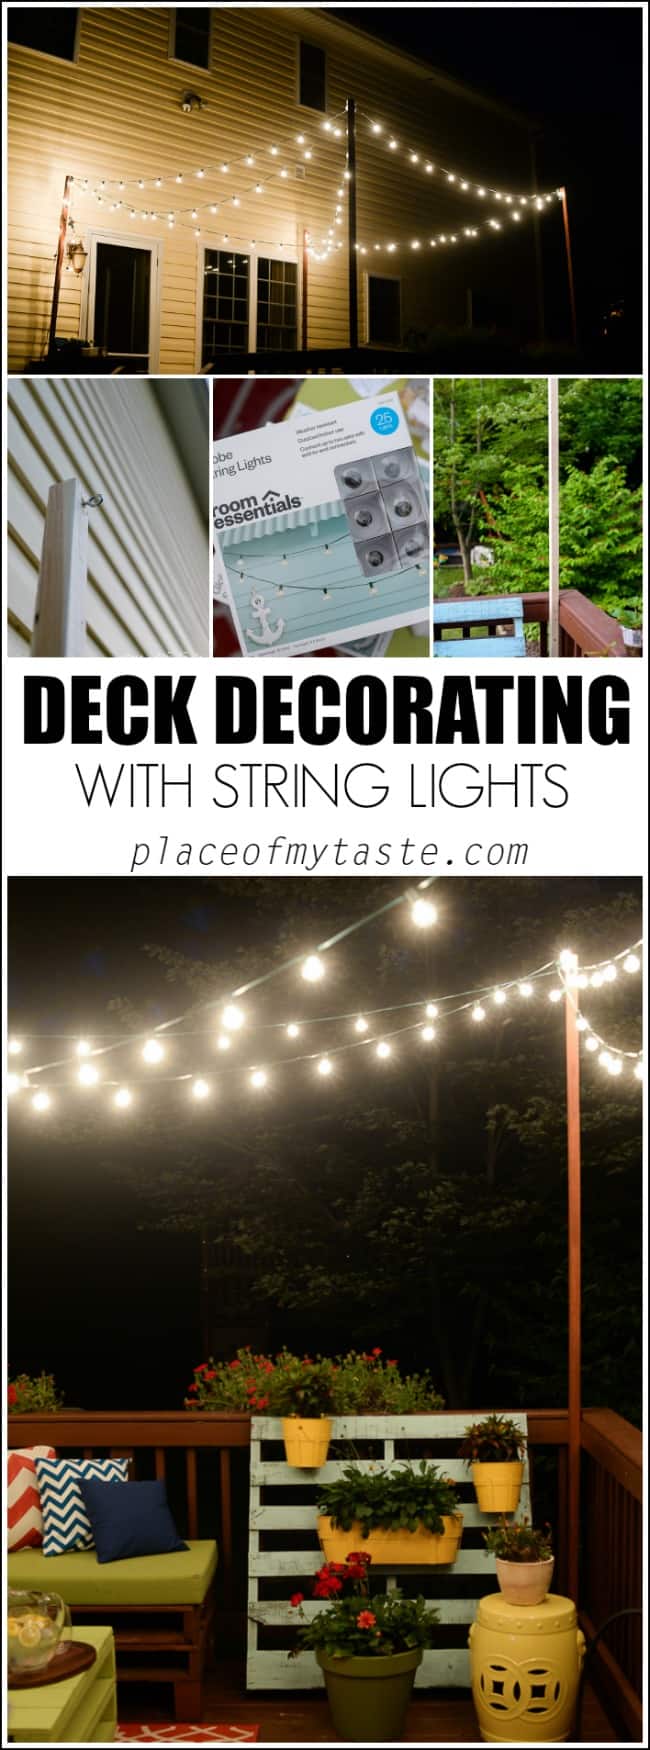 Learn how to hang string lights on your deck!! So fun and cozy! I promise you can do it and your summer nights will be more enjoyable!